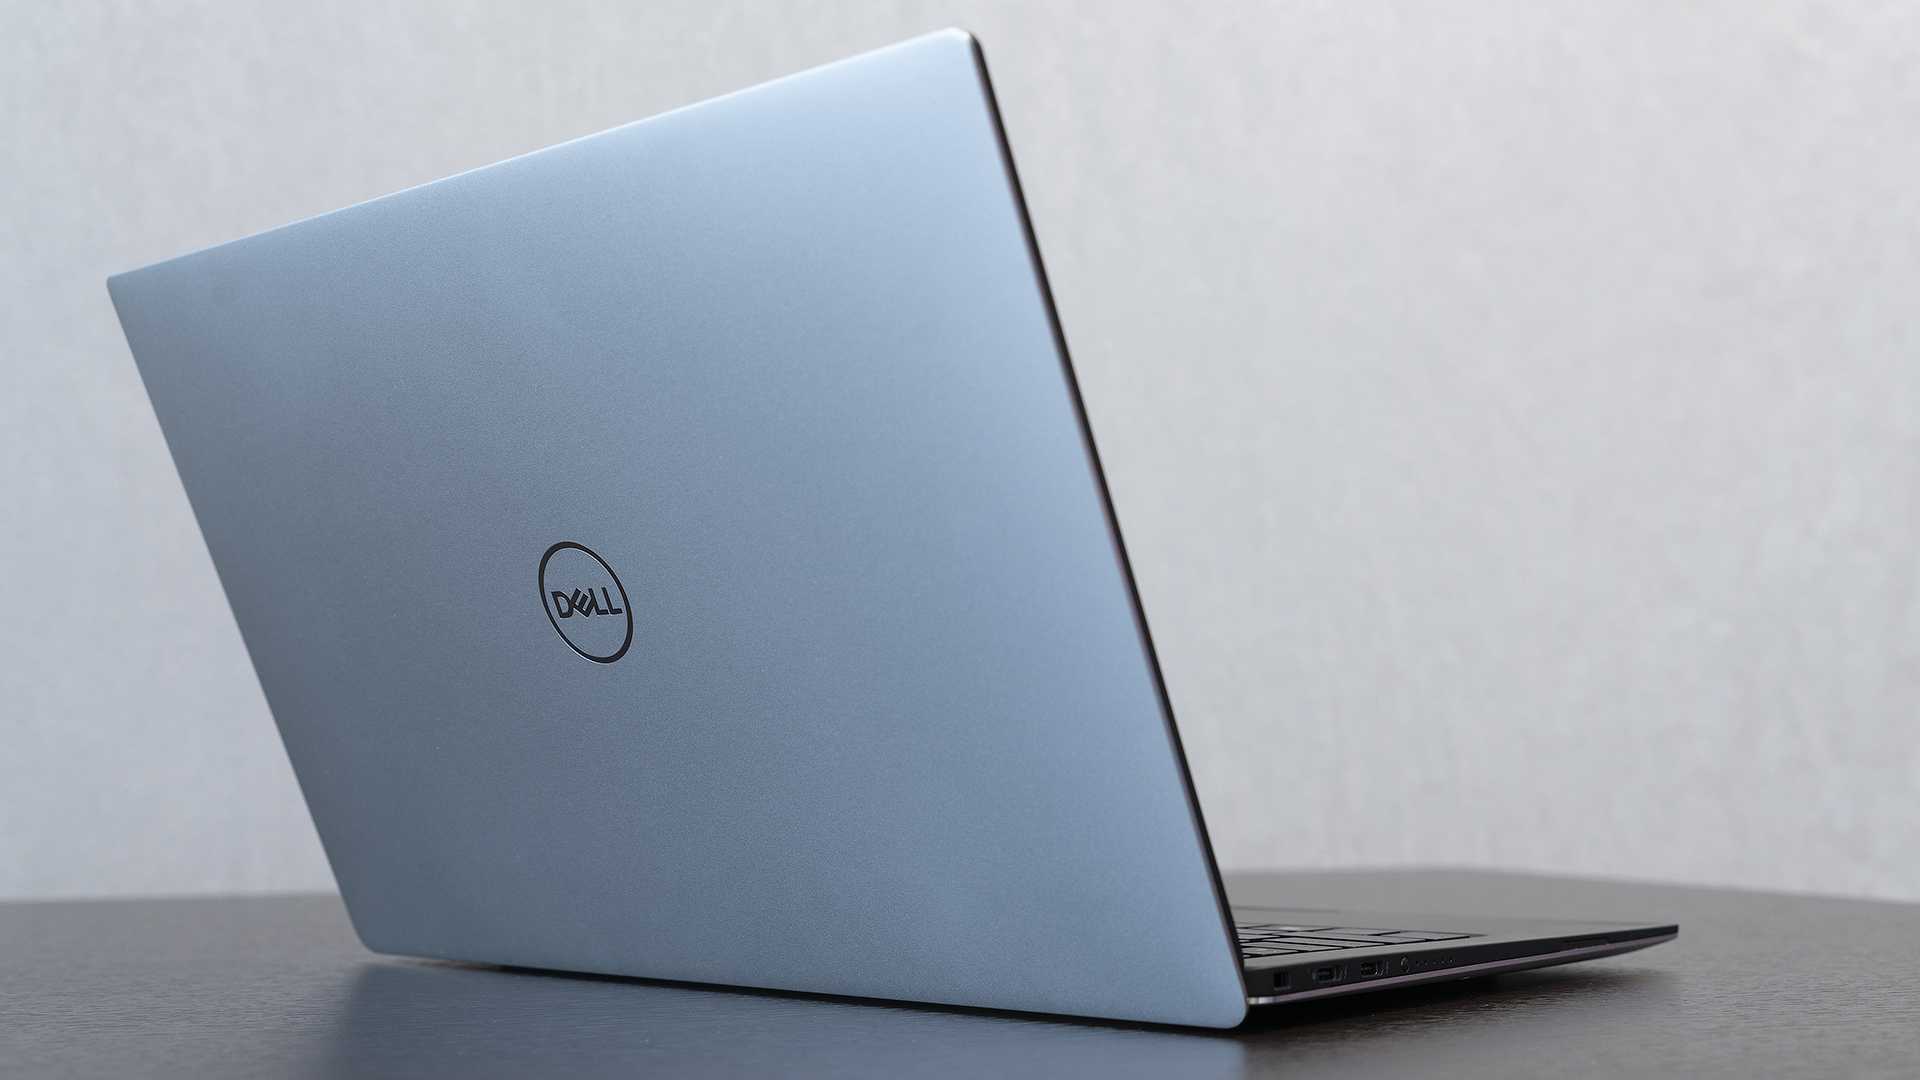 Dell xps 13 9350 review – core i7 model, with intel iris 540 graphics